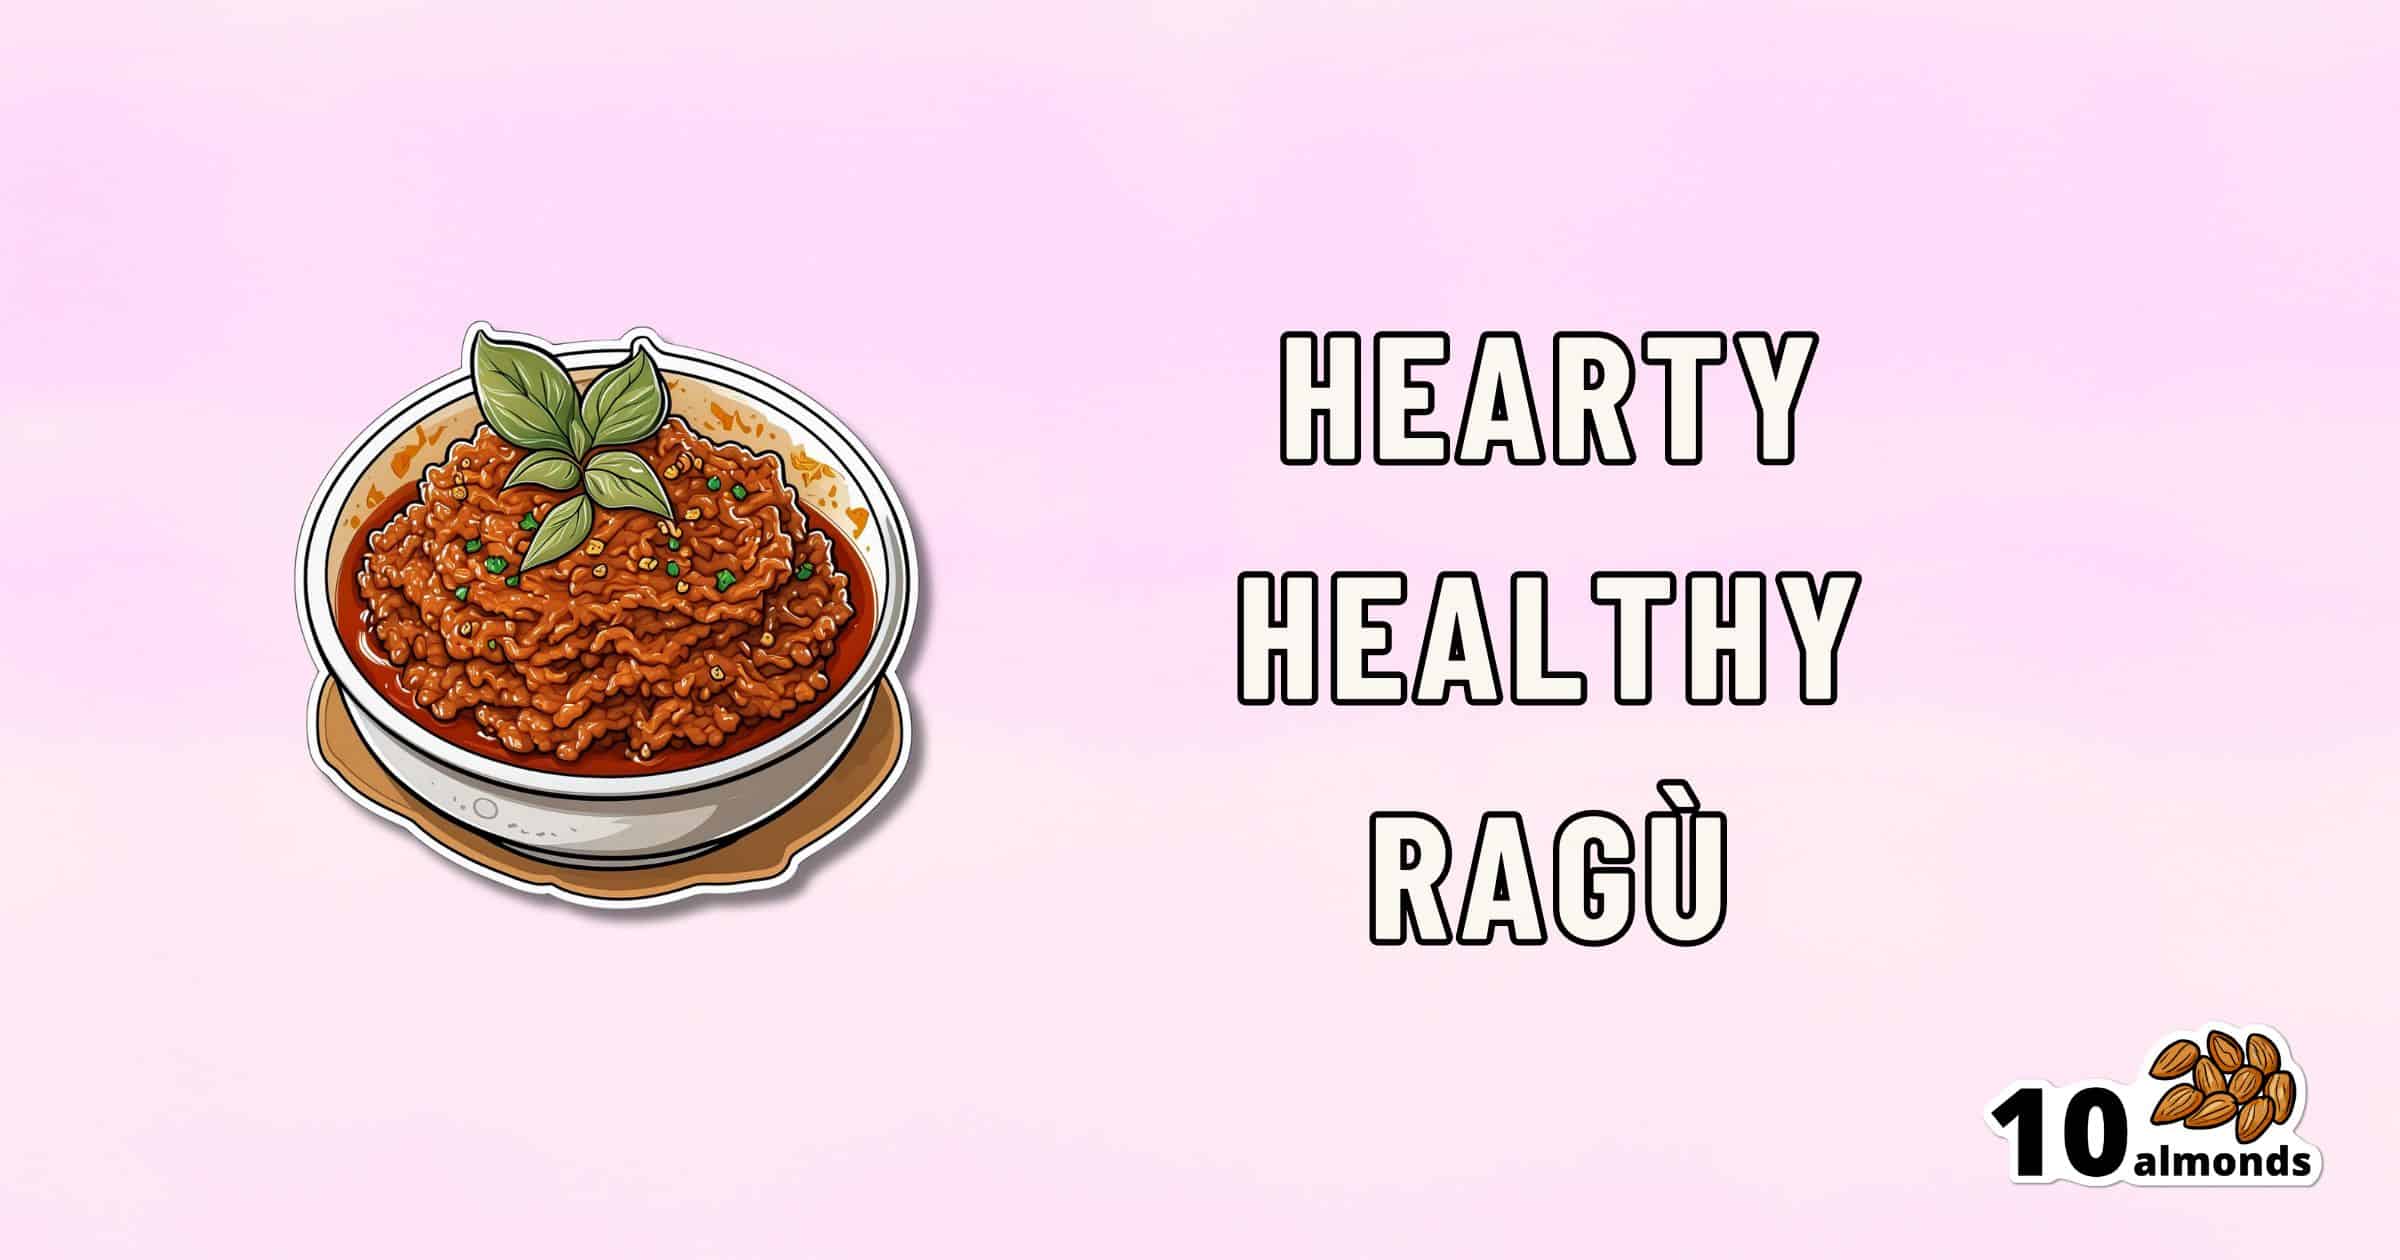 Illustration of a bowl filled with hearty, healthy ragù topped with basil leaves set against a pink background. The text "Hearty Healthy Ragù" is written beside the bowl. The bottom right corner displays an image of almonds and the text "10 almonds.